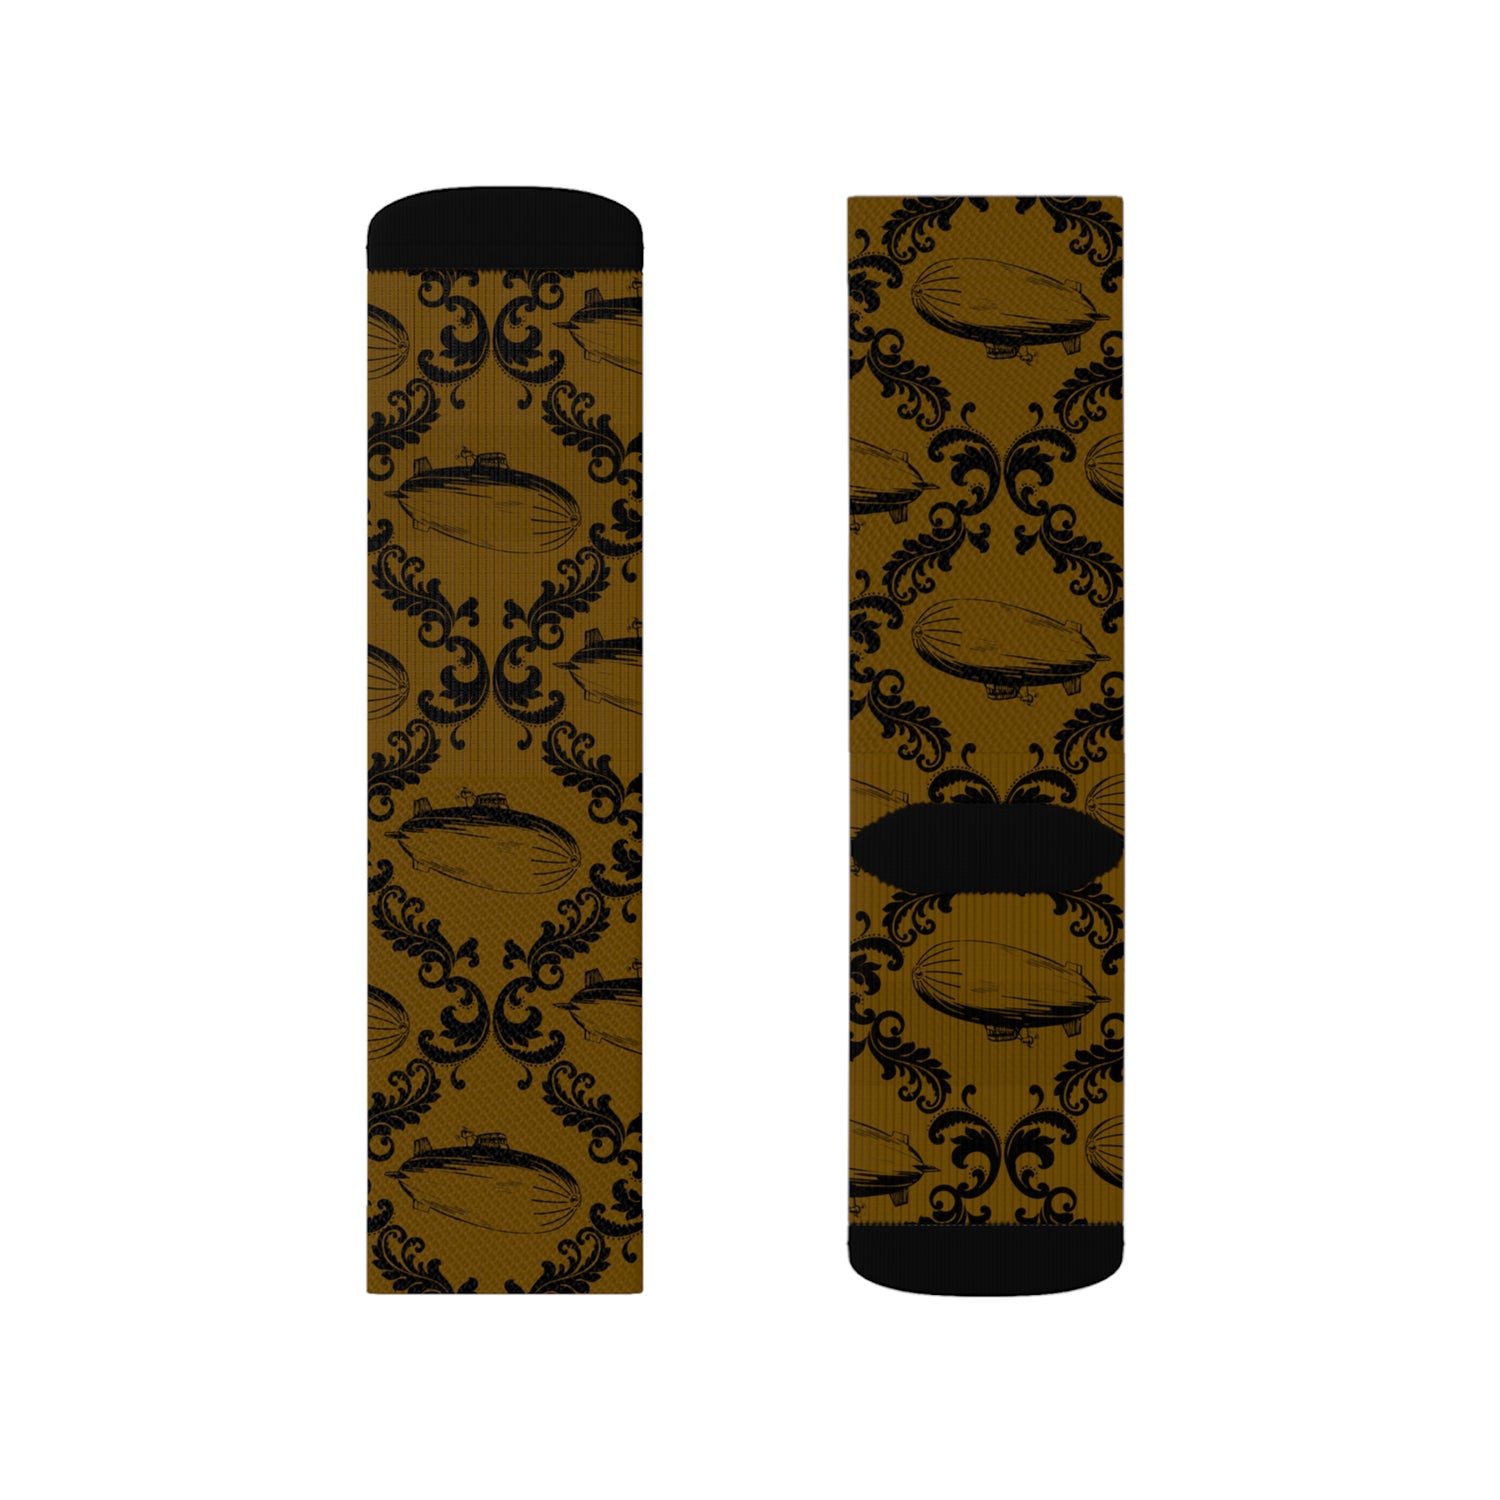 Airship Damask Steampunk Inspired Socks Lord and Lady Towers